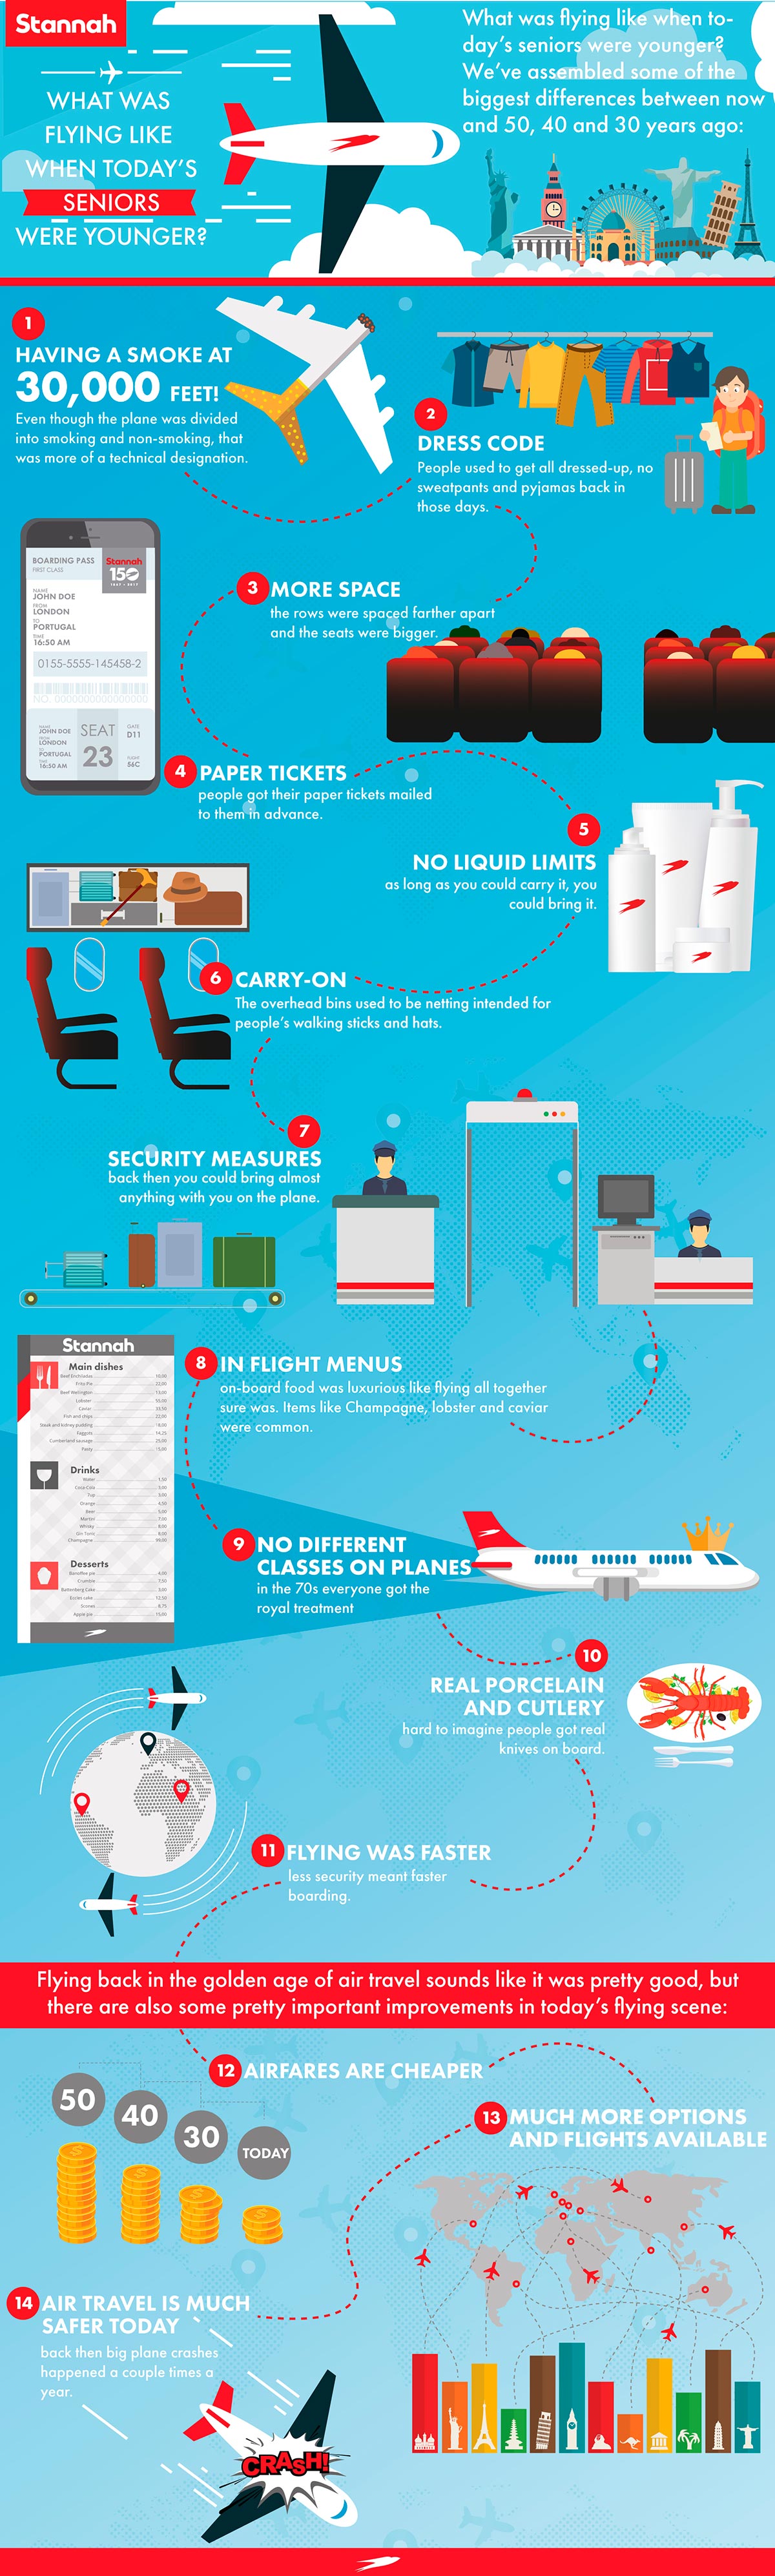 Airport services for seniors